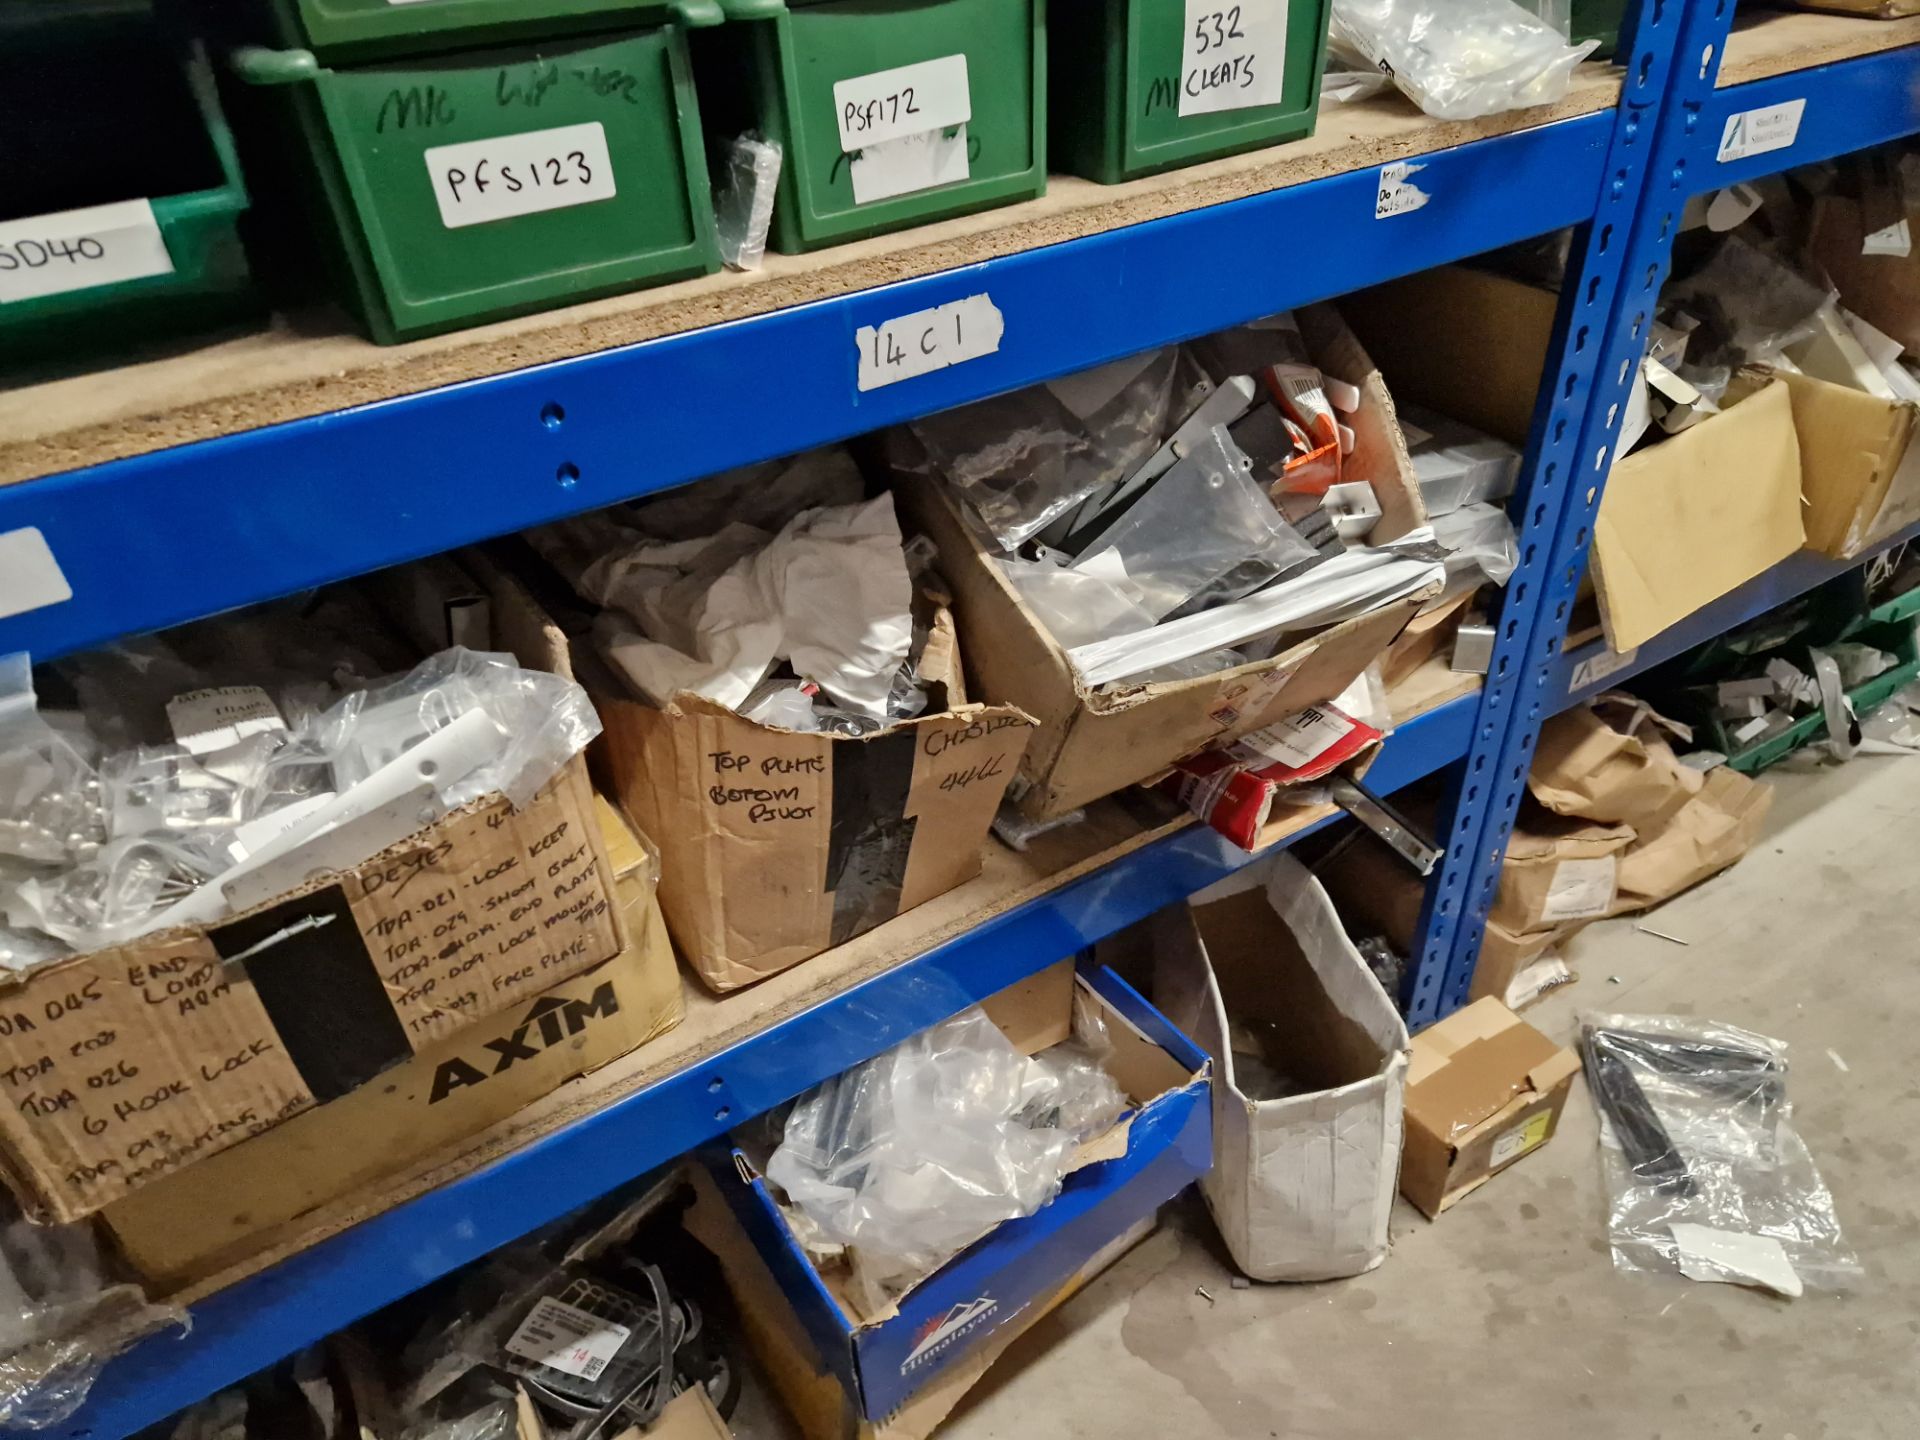 Contents to Two Bays of Shelving, including Rubber Gaskets, Aluminium Profile, End Caps, Screws, - Image 5 of 11